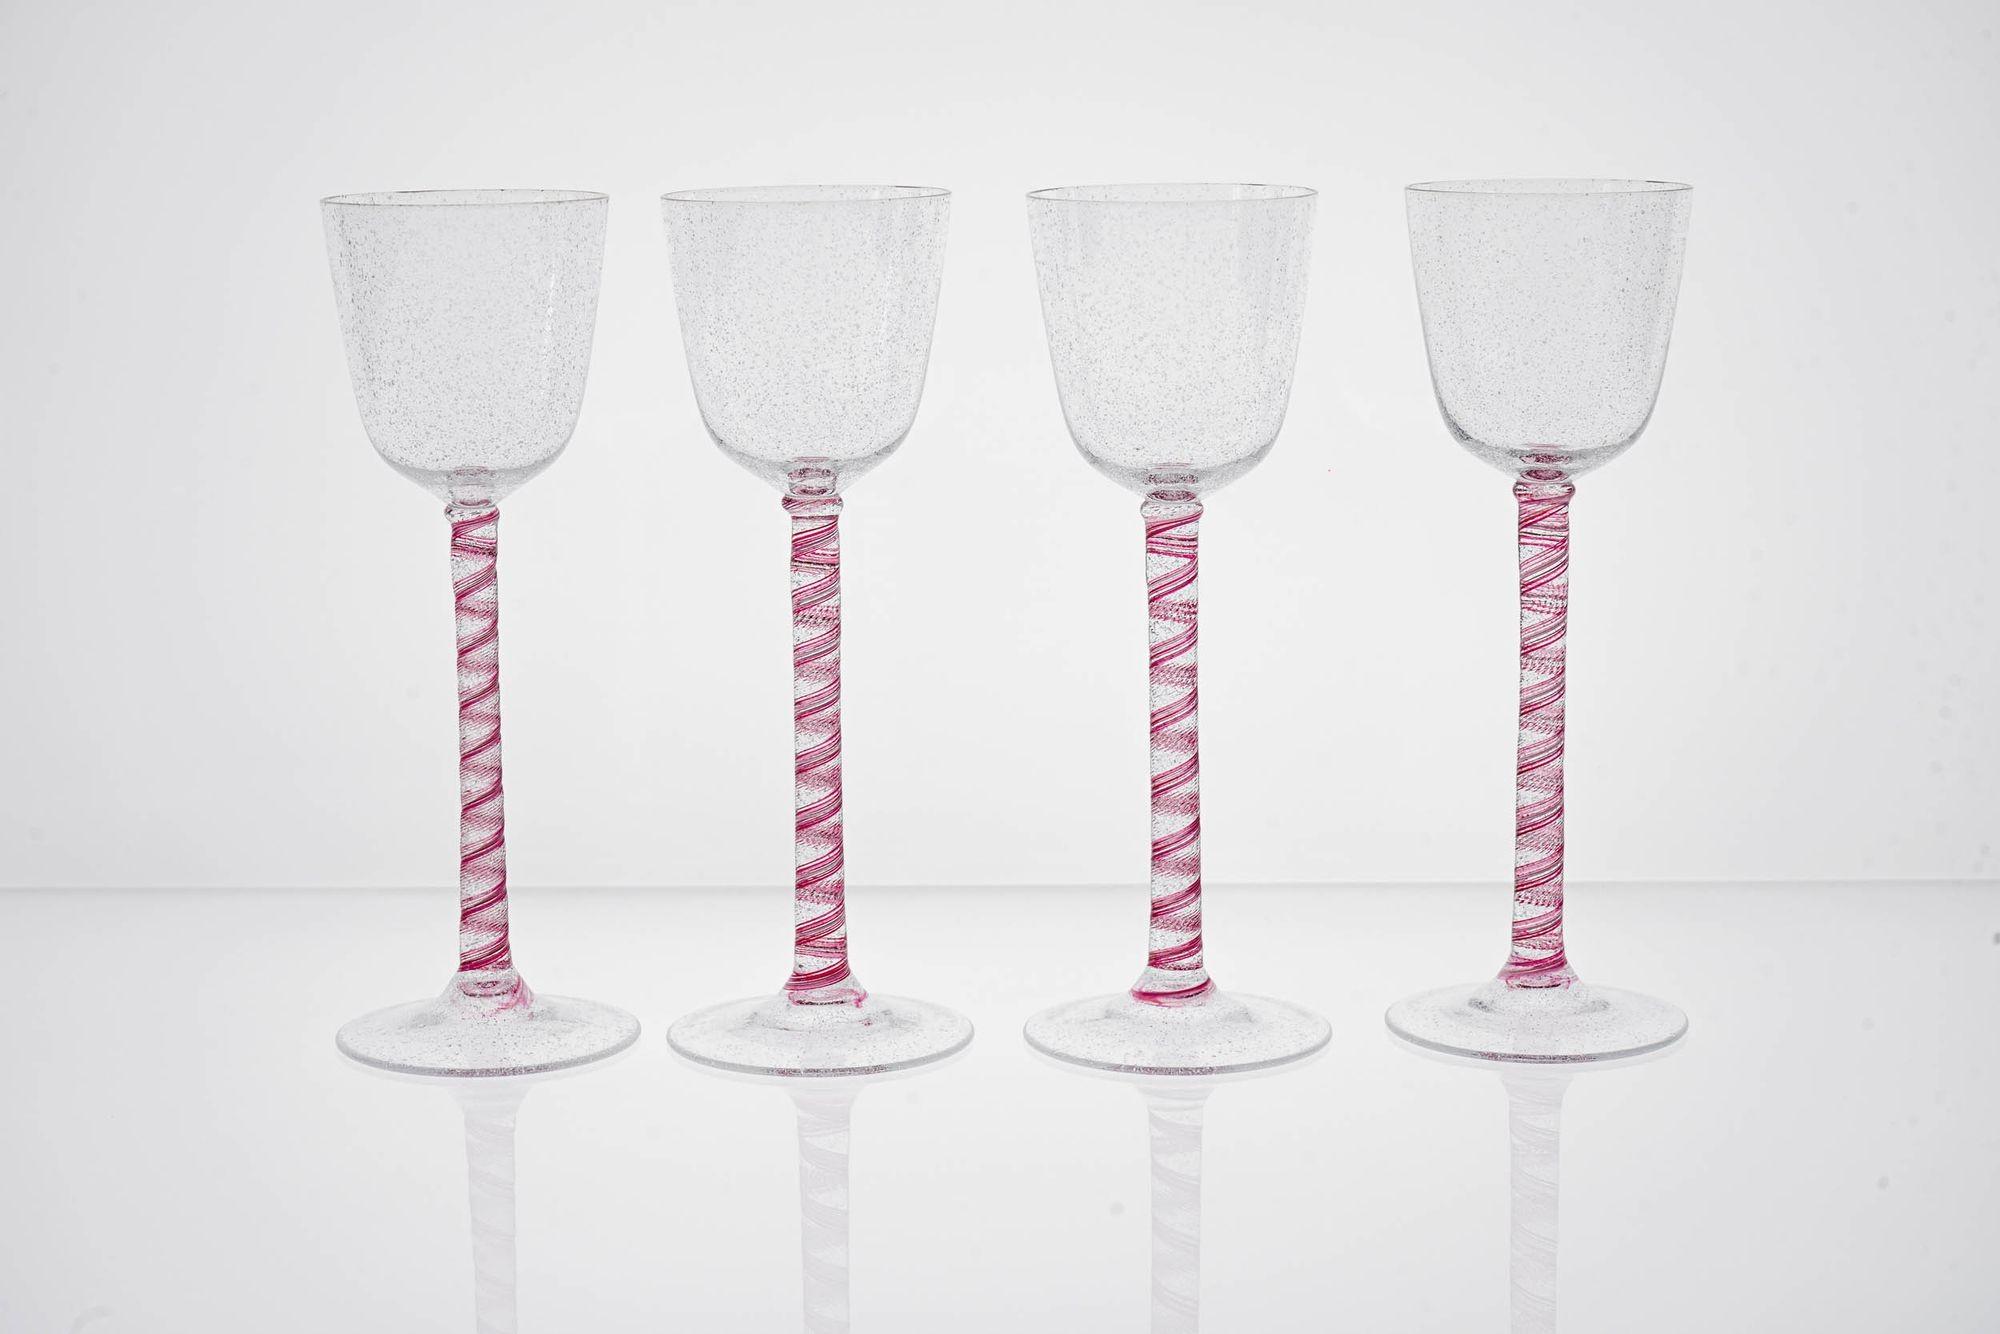 Exceptional set of Cenedese stem glass.
This unrepeatable set of stemware reproduces the Georgian 18th Century classic twisted stem glass. The twisted stem is in Ruby beads with a single white bead inside. Cenedese wanted to re-create the antique